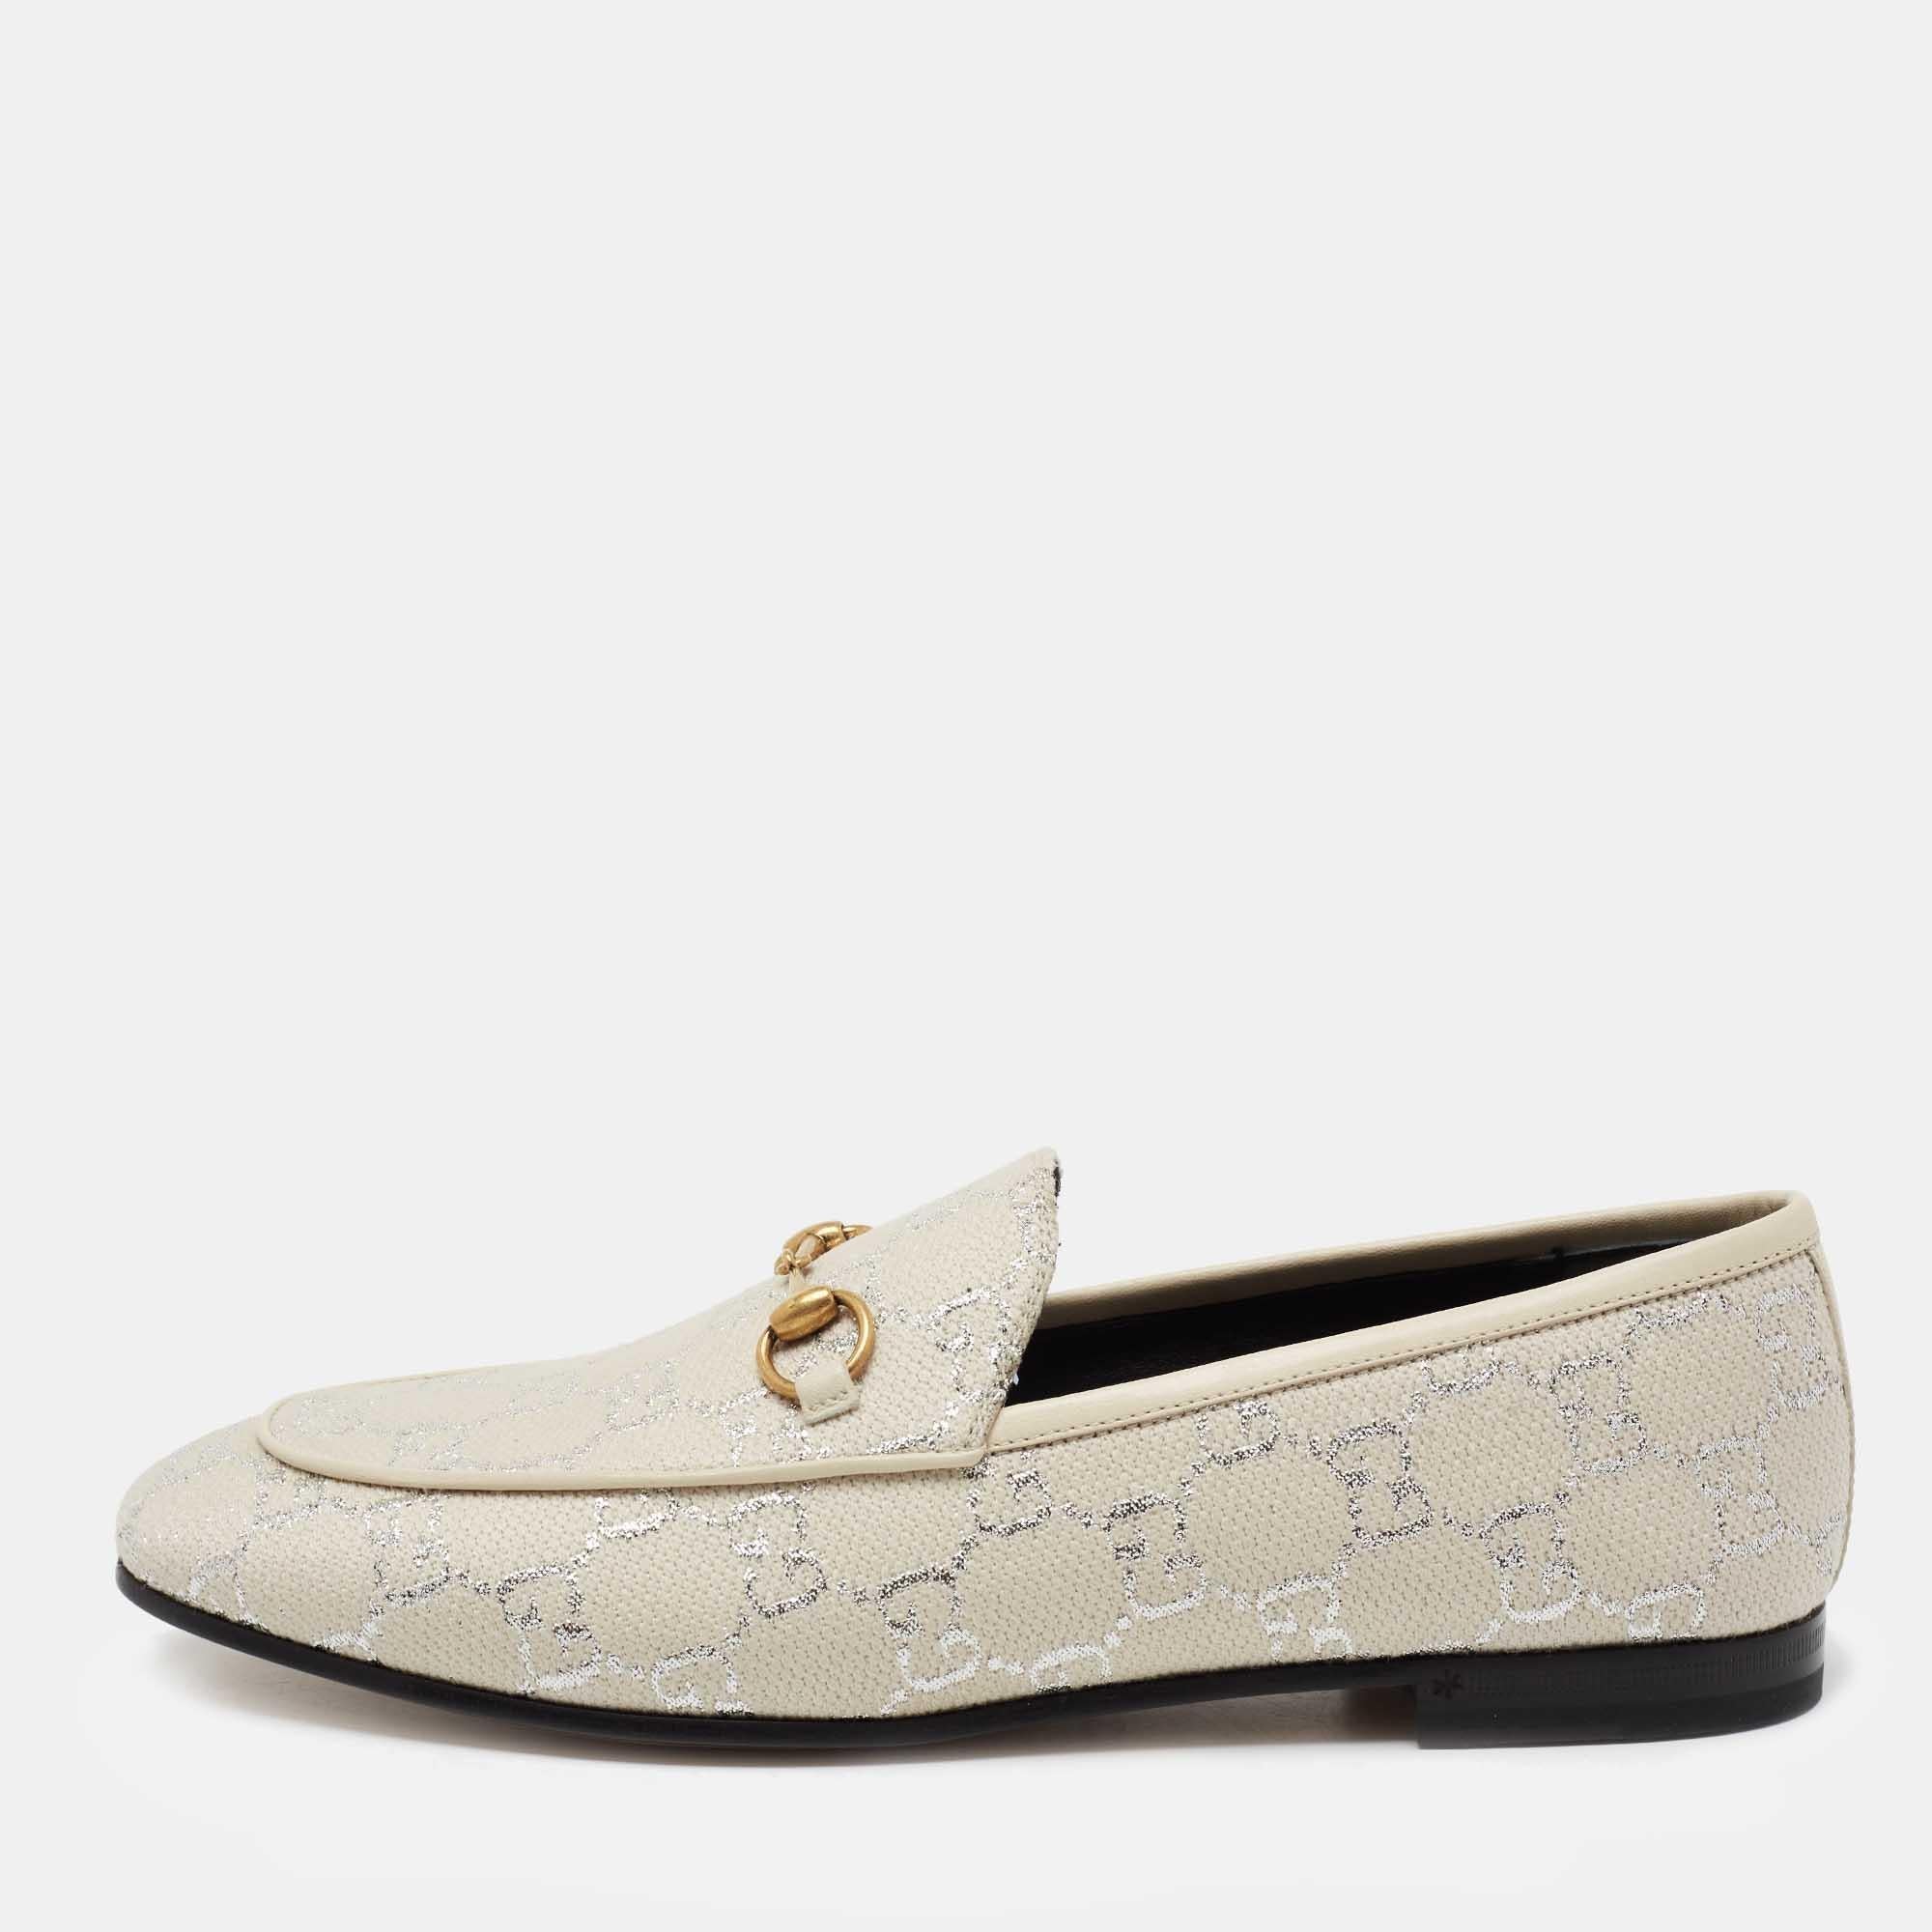 Exquisite and well-crafted, these Gucci loafers are worth owning. They have been crafted from lovely woven Lamé fabric and they come flaunting Horsebit details on the uppers. The slip-on loafers are ideal to wear all day.

Includes: Original